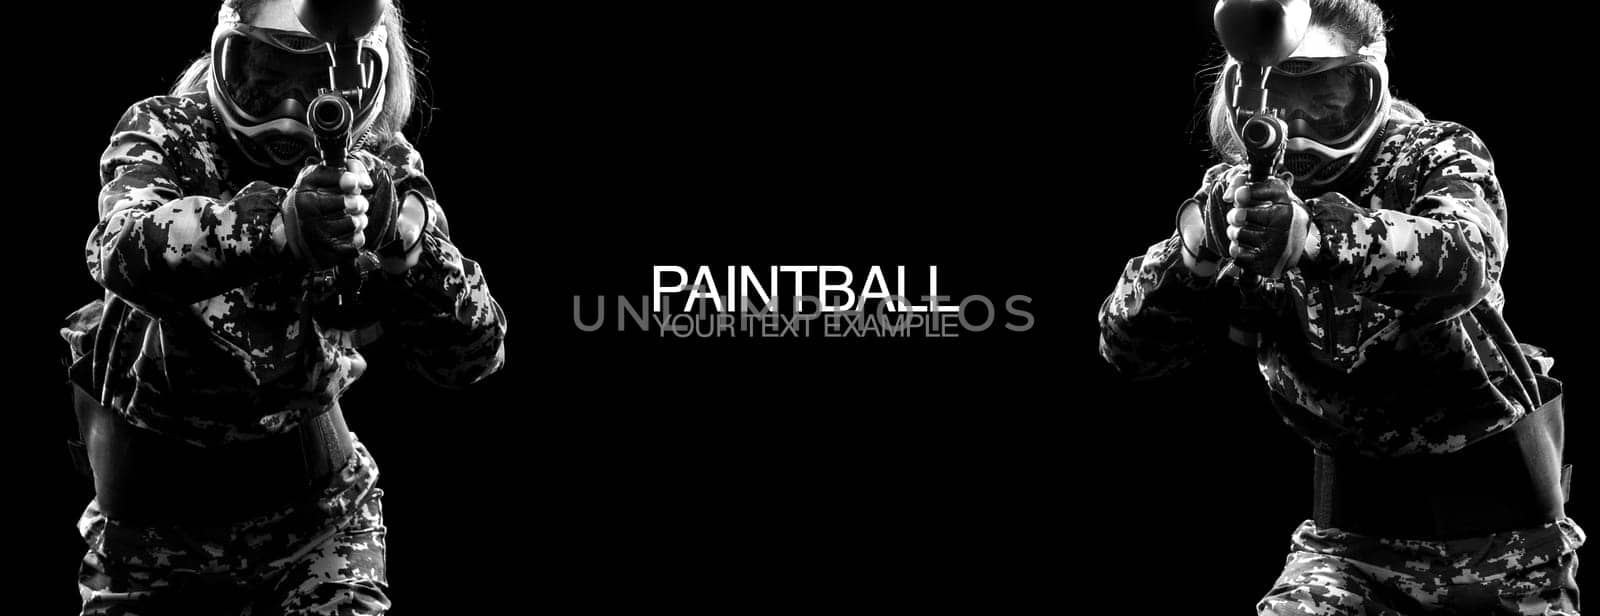 Paintball game and lasertag soldiers in military isolated on black background. Poster concept with copy space. Sport concept. by MikeOrlov